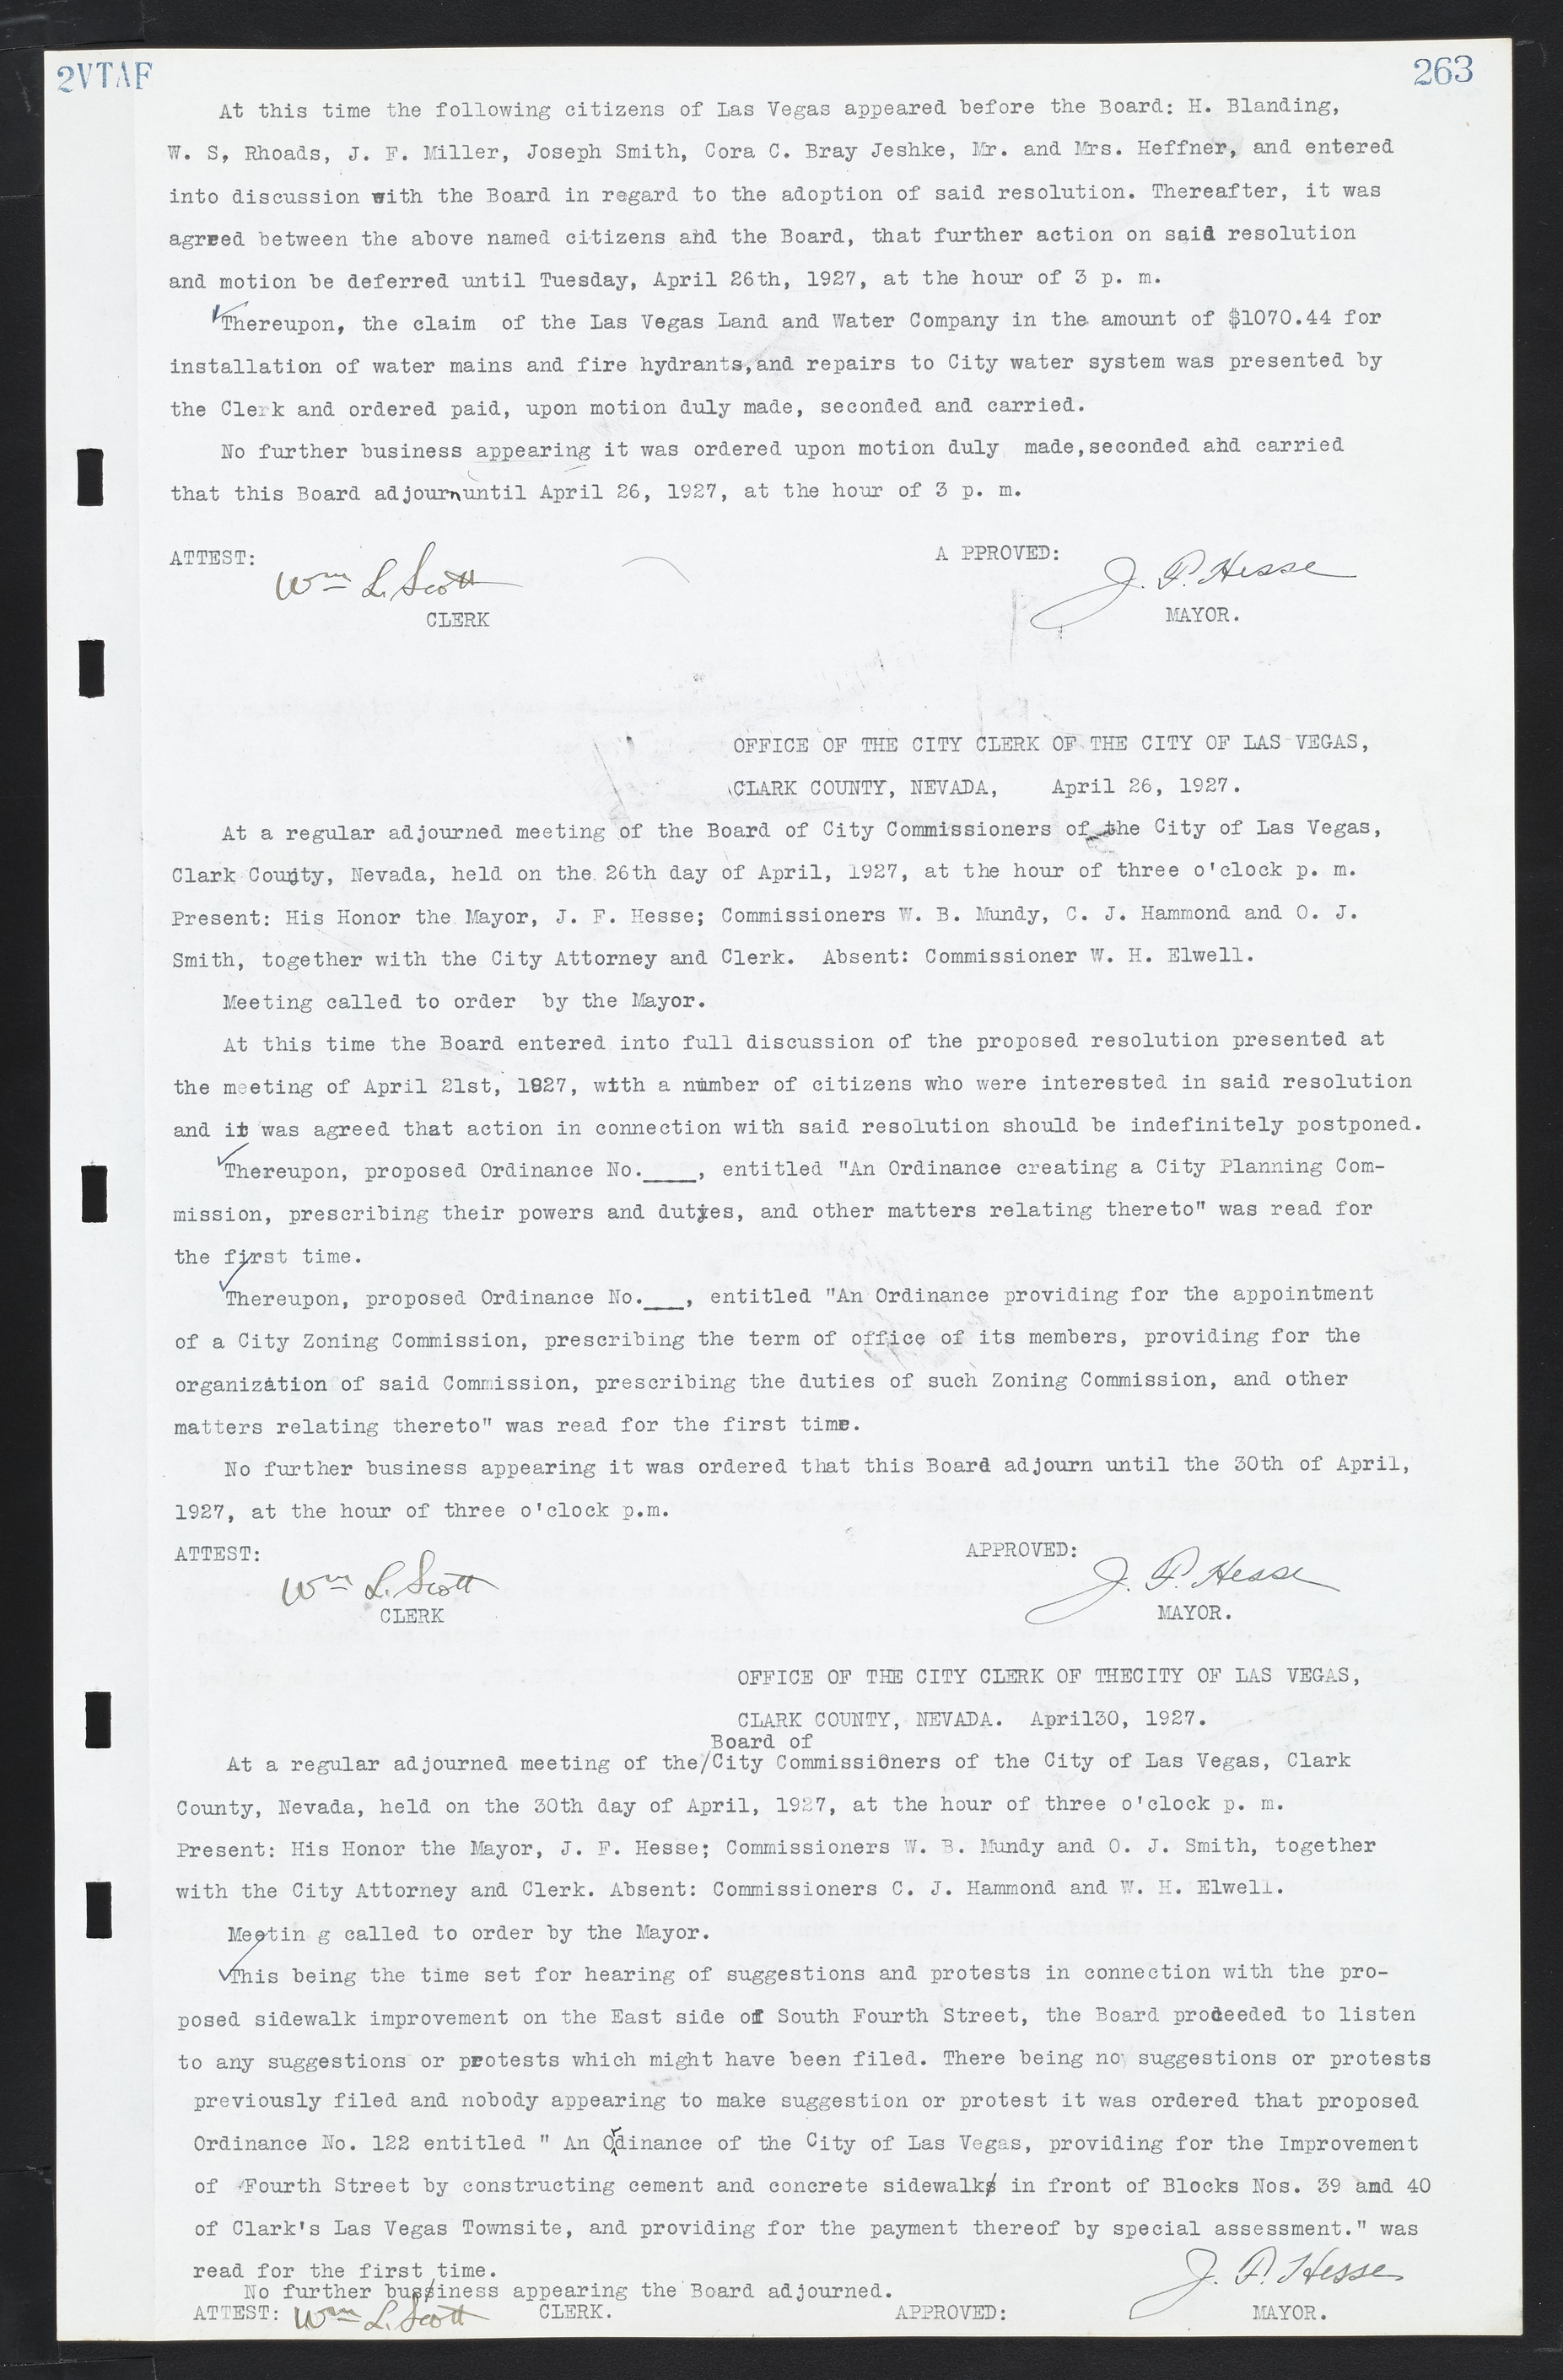 Las Vegas City Commission Minutes, March 1, 1922 to May 10, 1929, lvc000002-272